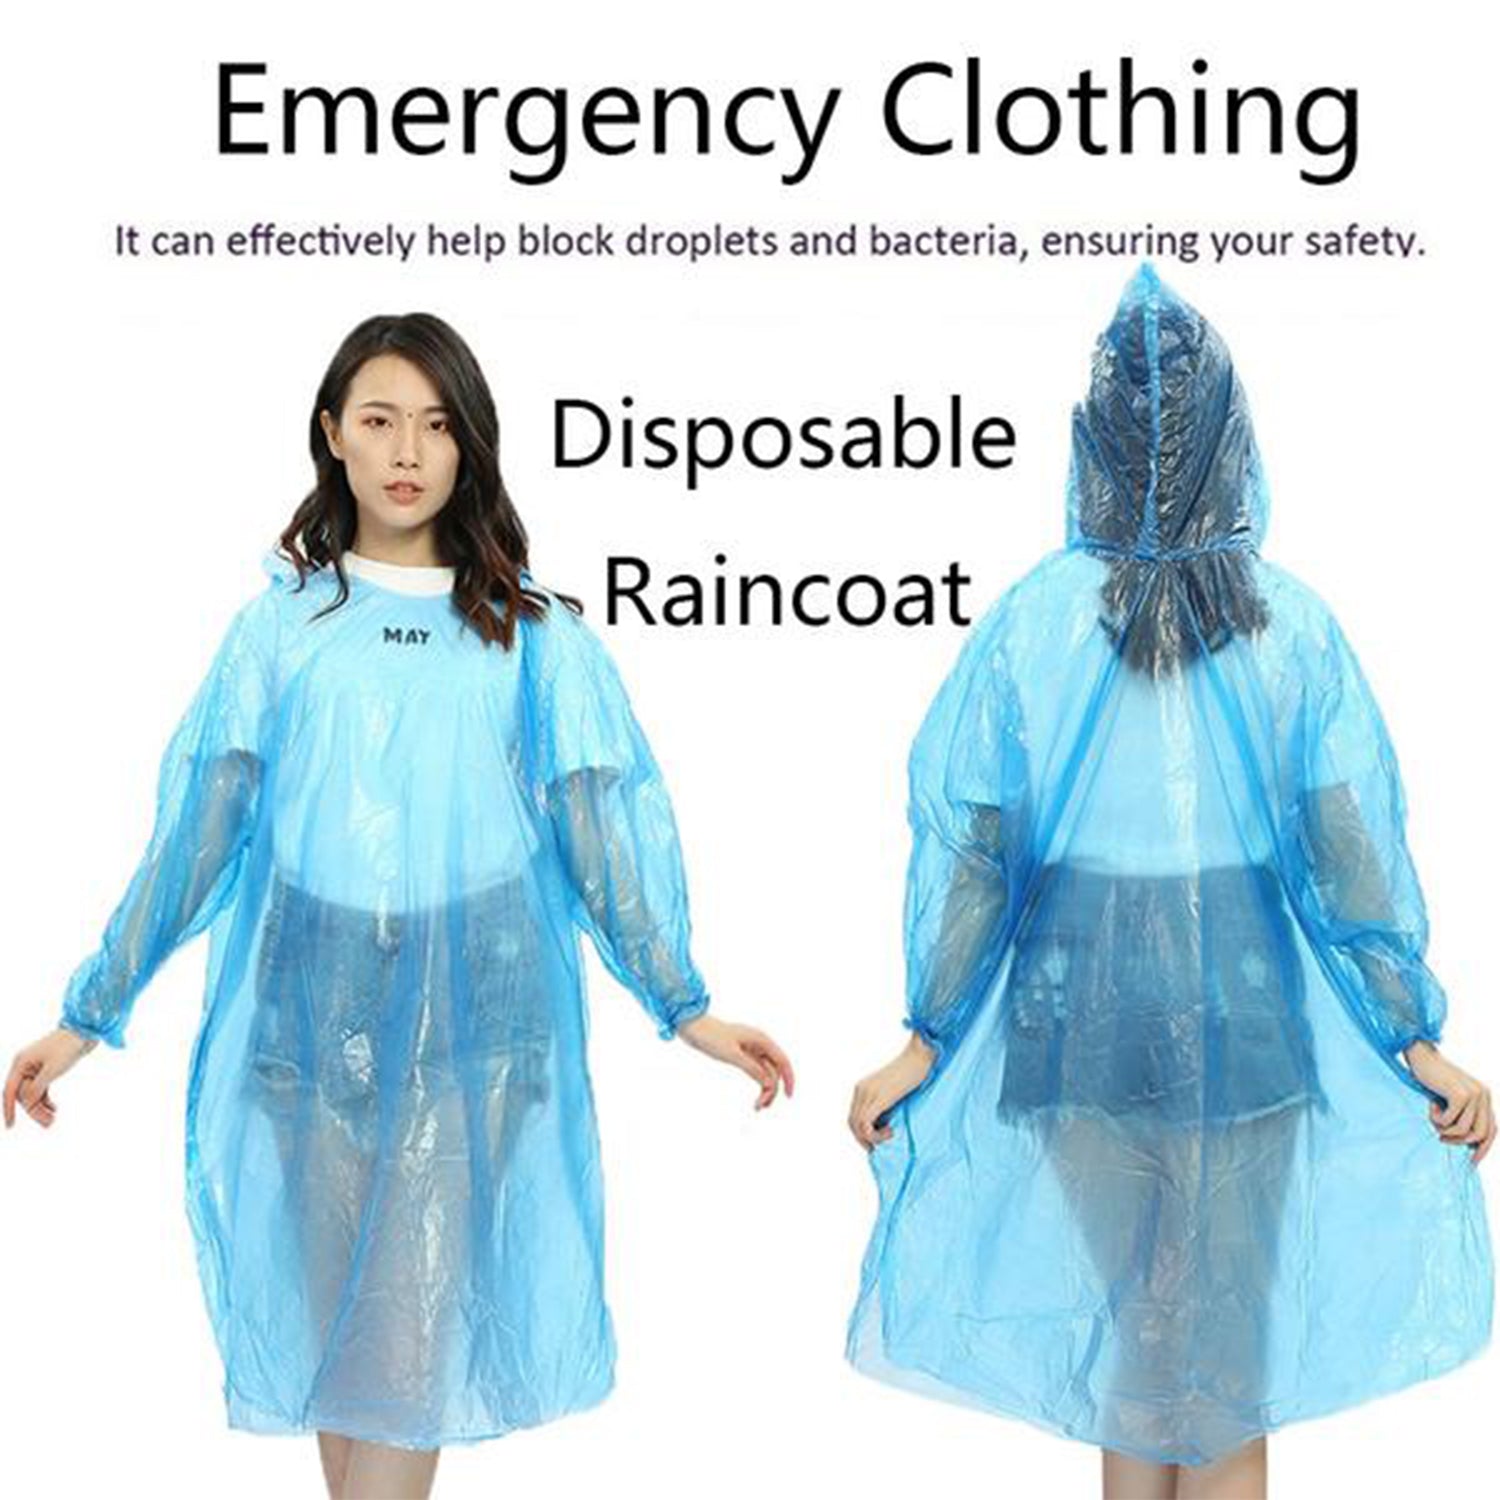 0242S Disposable Easy to Carry Raincoat